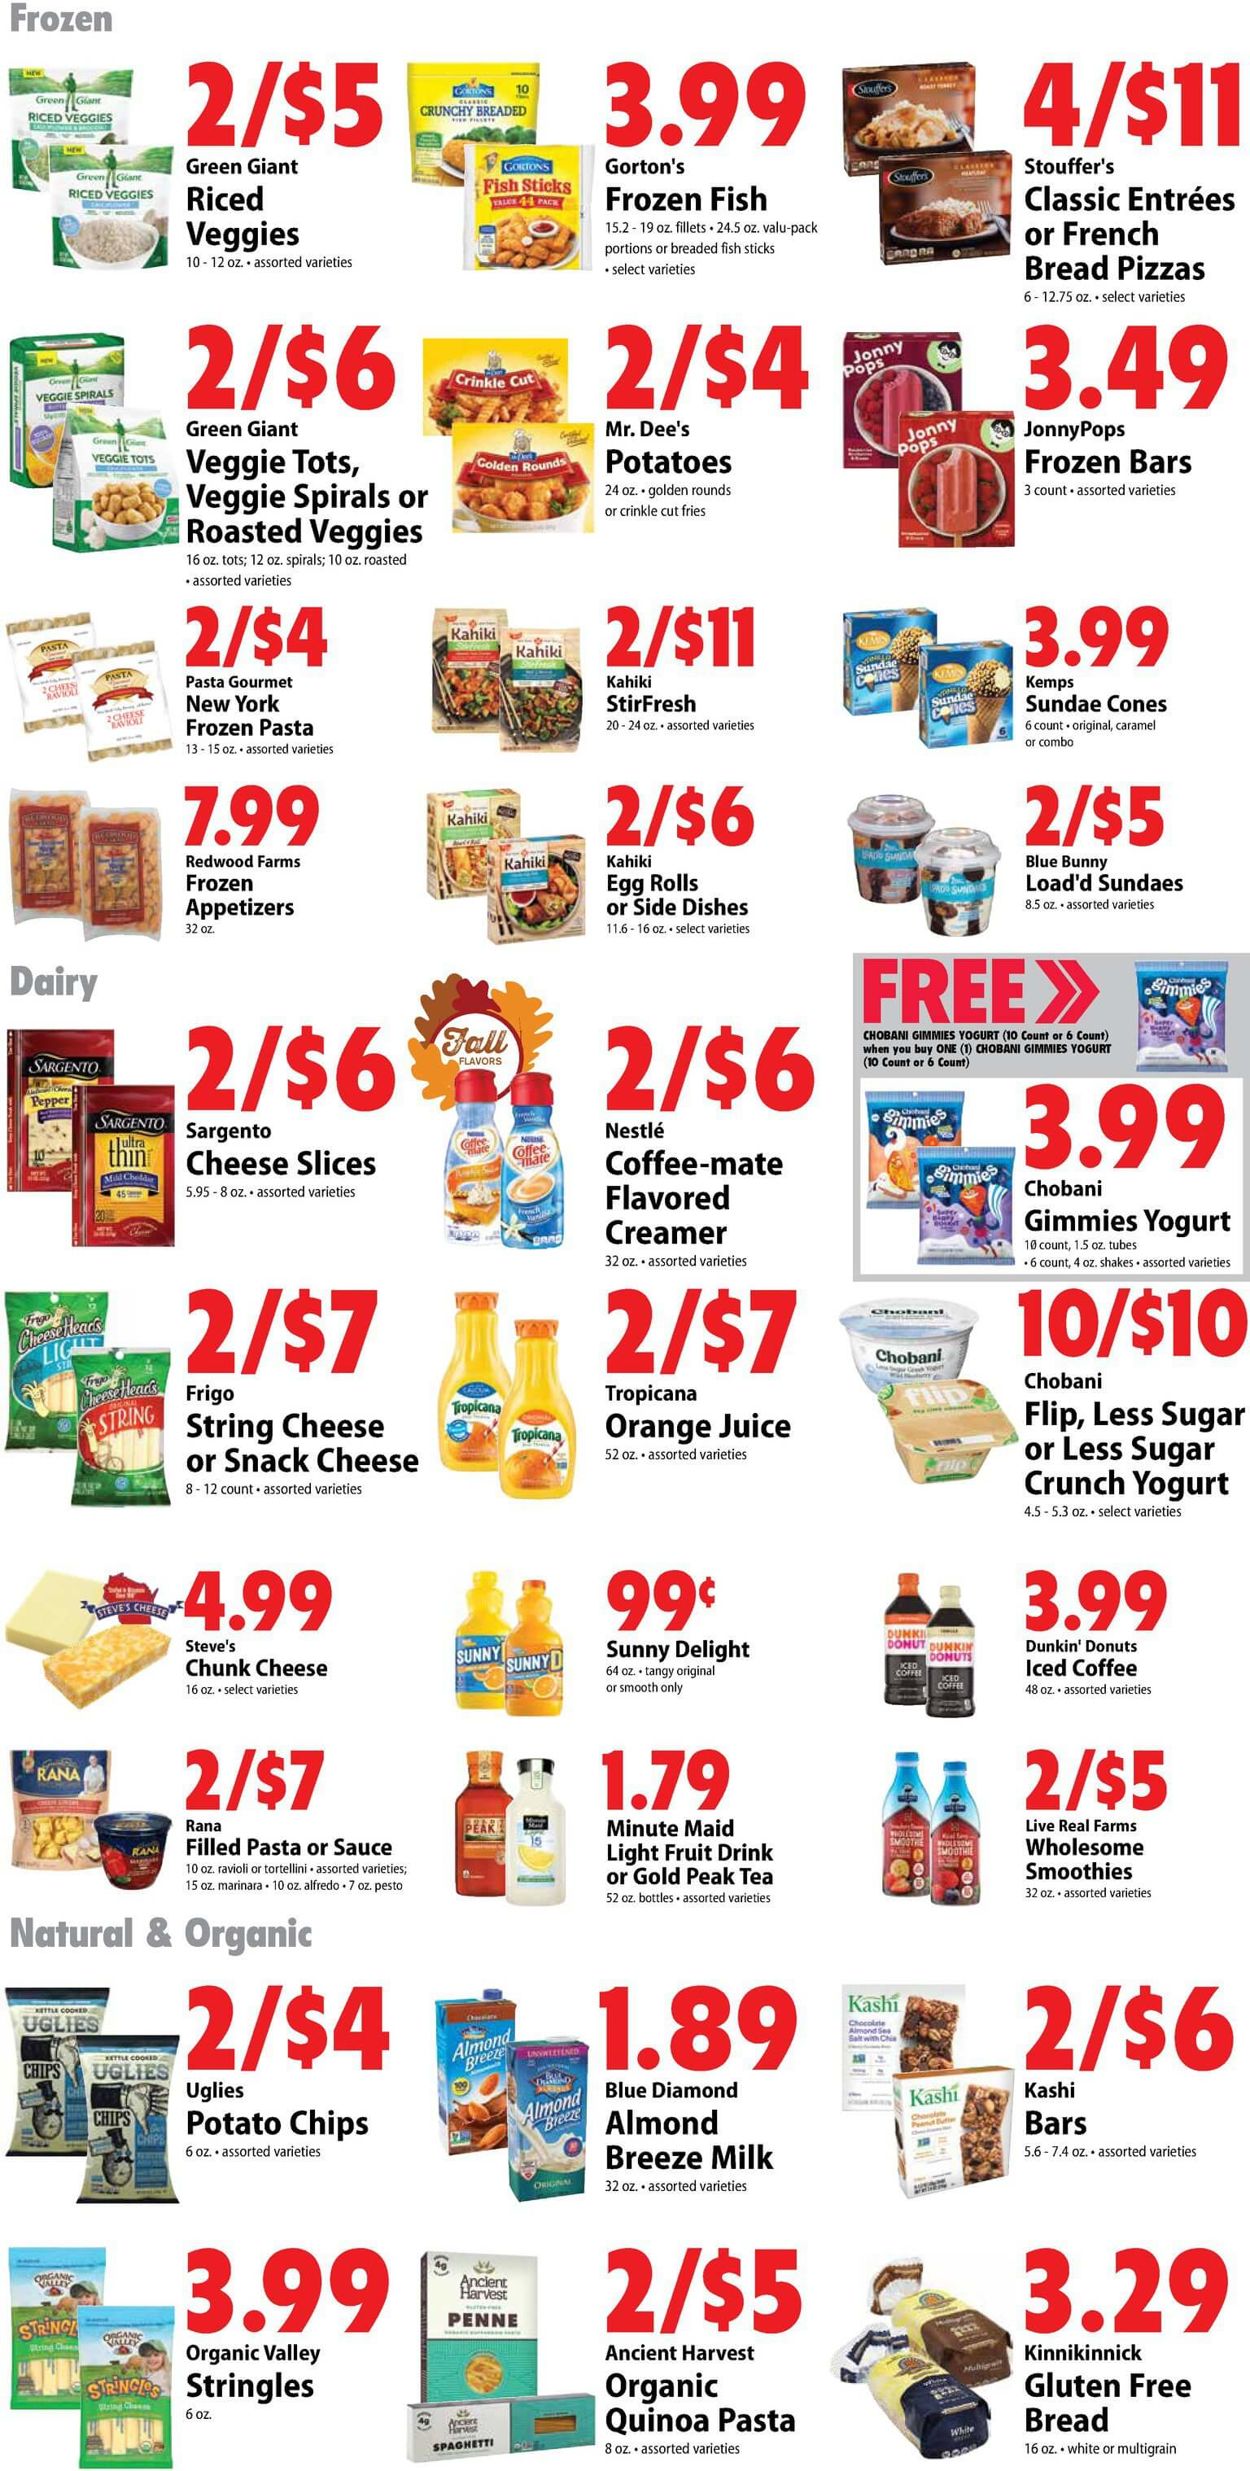 Festival Foods Current weekly ad 10/02 10/08/2019 [7]